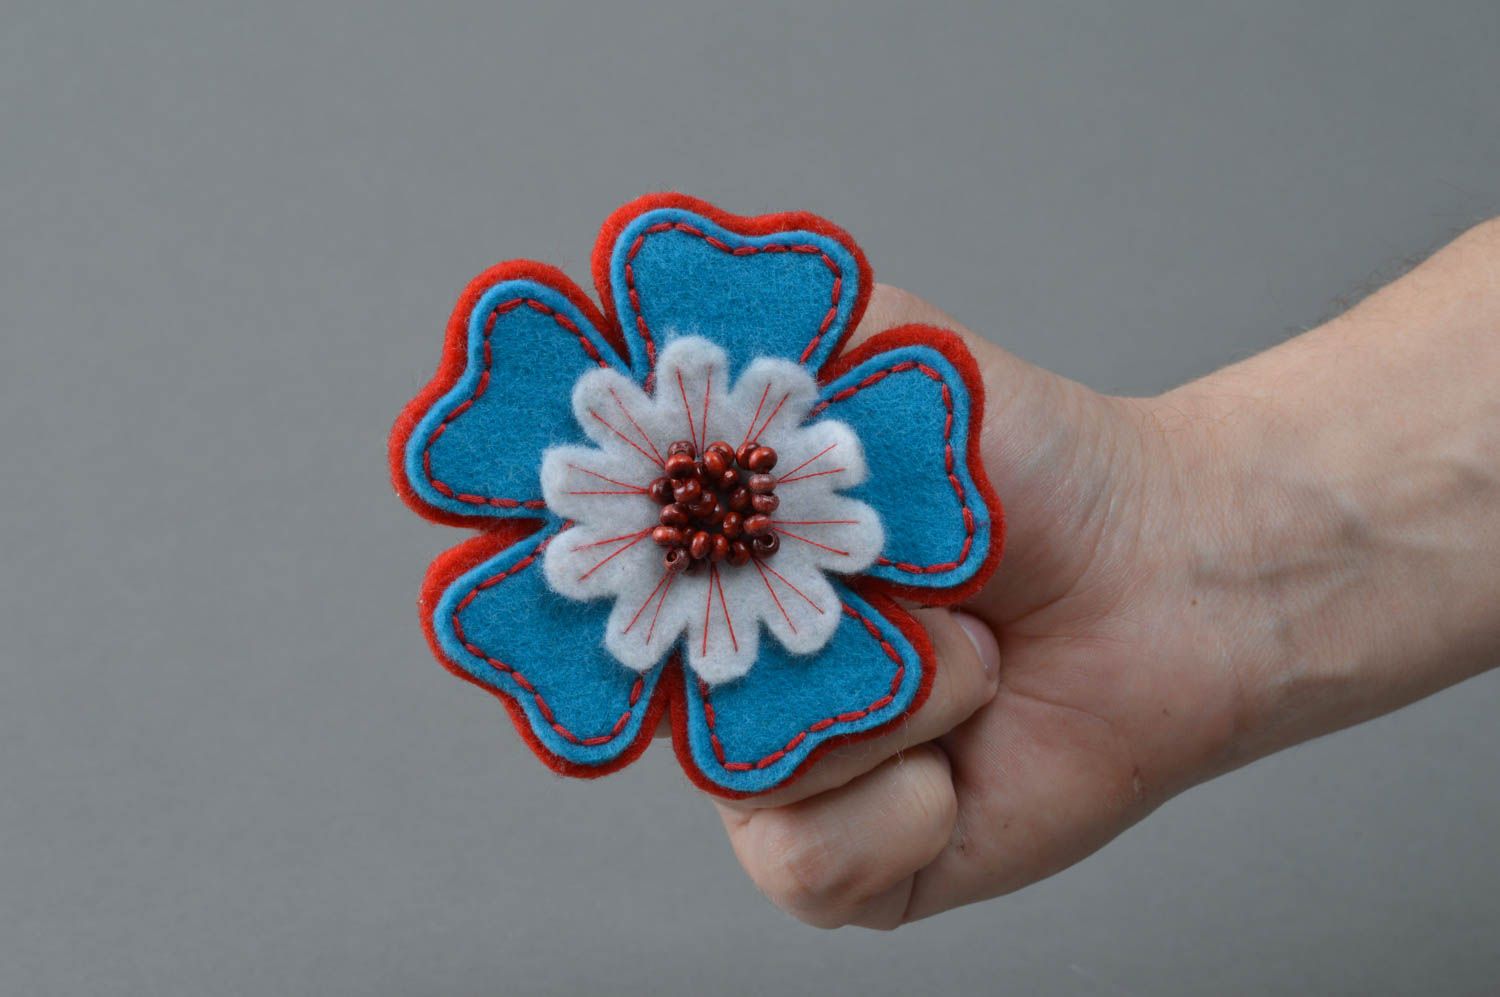 Handmade designer large red blue and white felt flower brooch with wooden beads photo 4